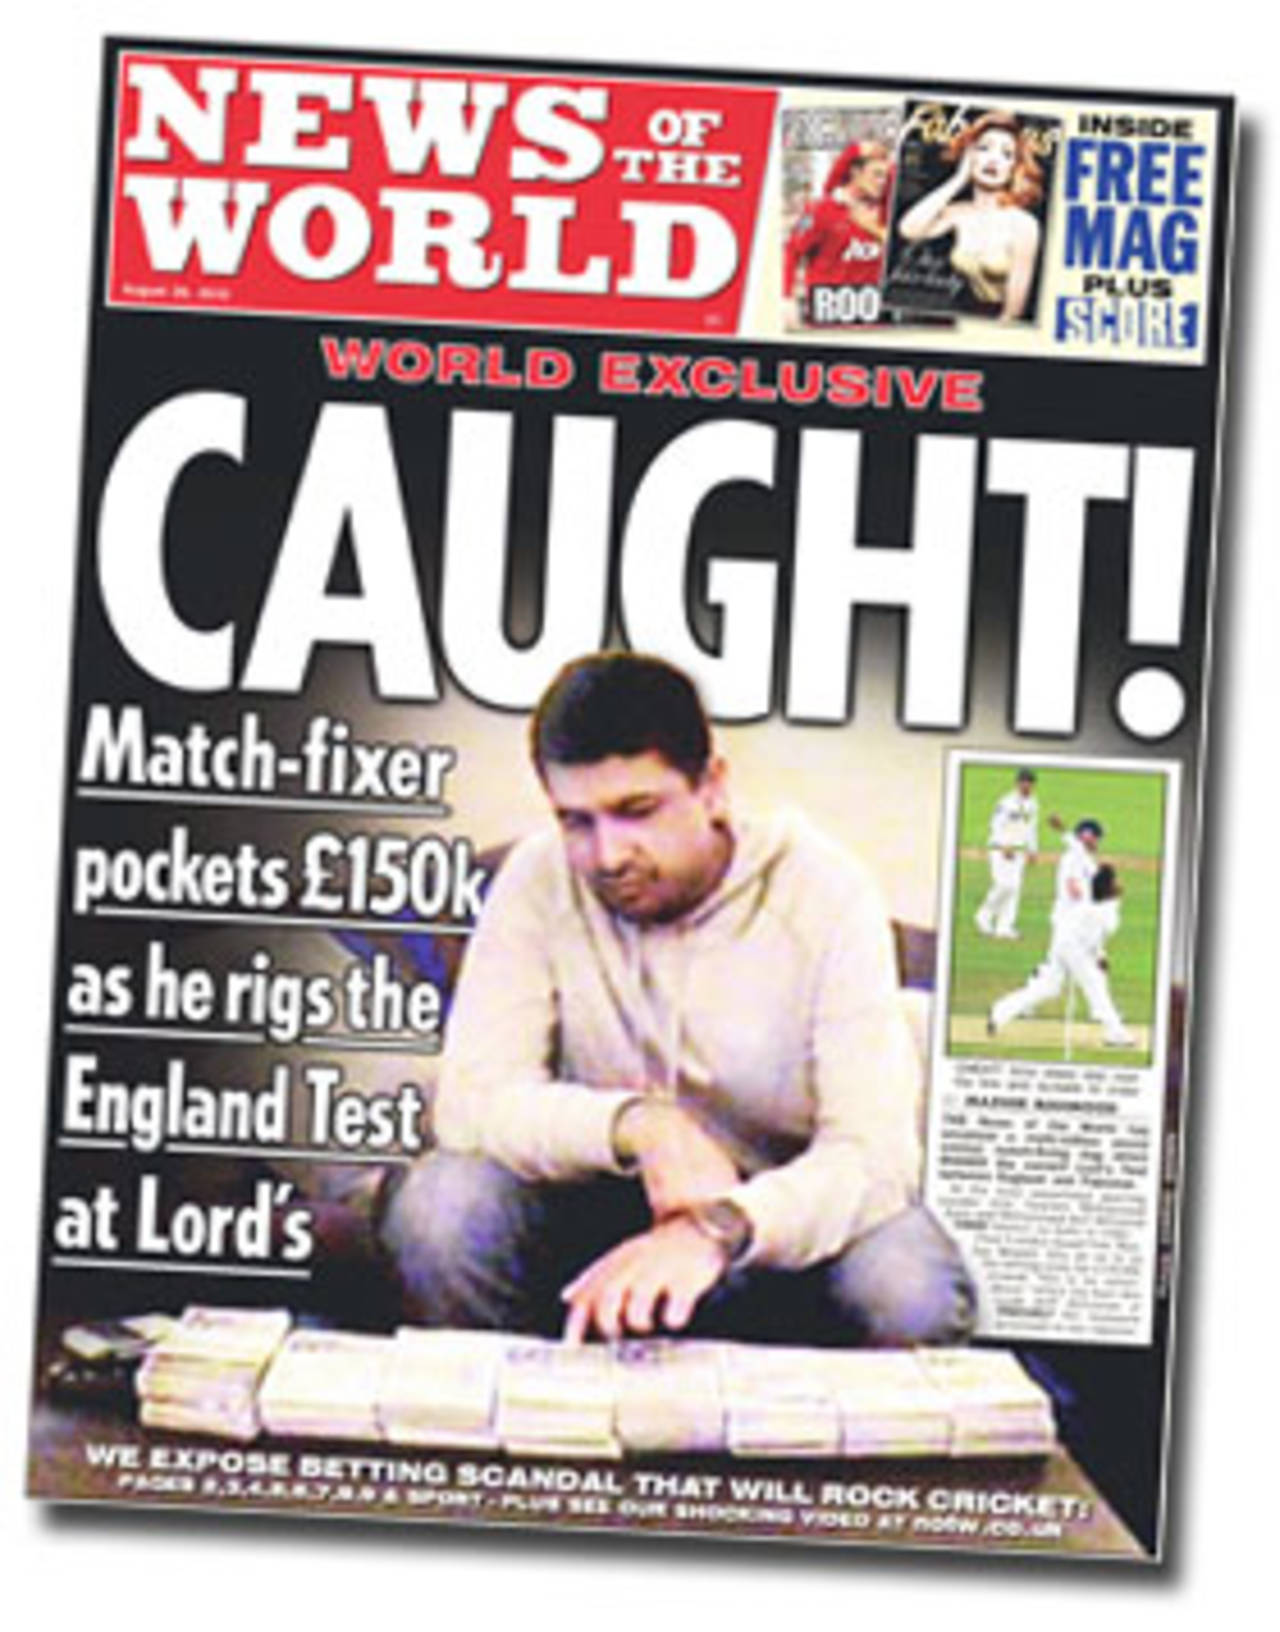 The <i>News of the World</i> headline implicating Pakistan's cricketers in a match-fixing scandal, August 29, 2010